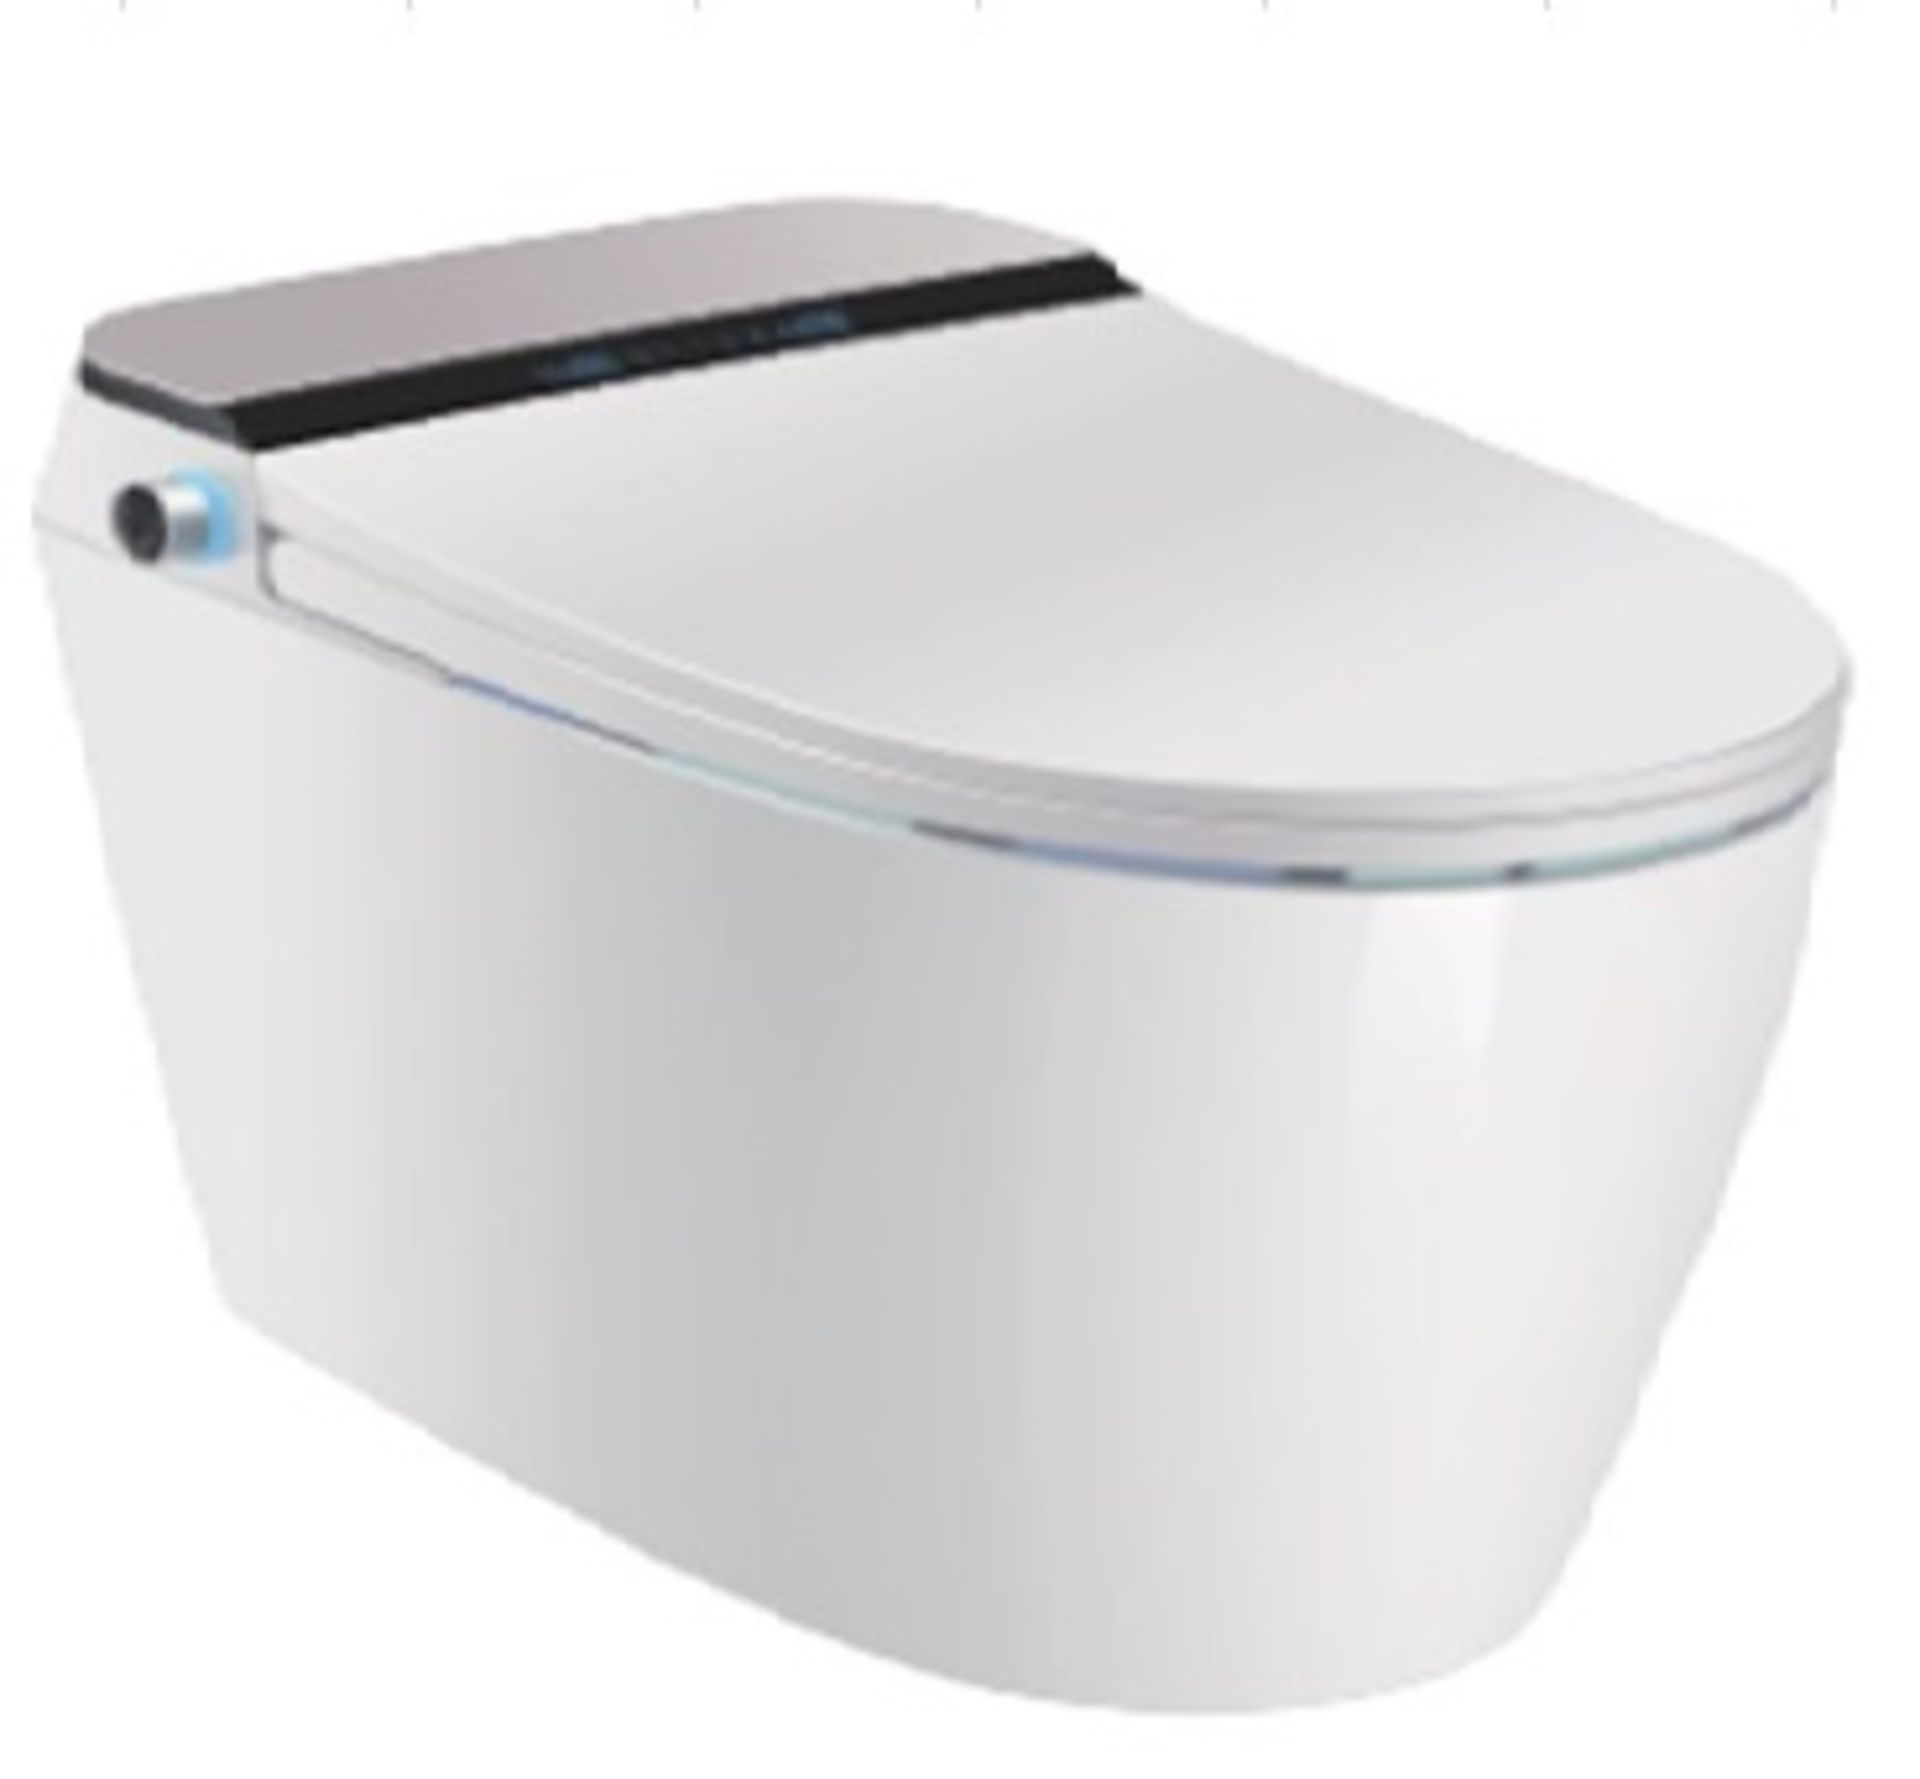 1 x Luxury Electric Smart Back To Wall Bidet Toilet With Remote Control - Latest 2020 Model - Bild 2 aus 2